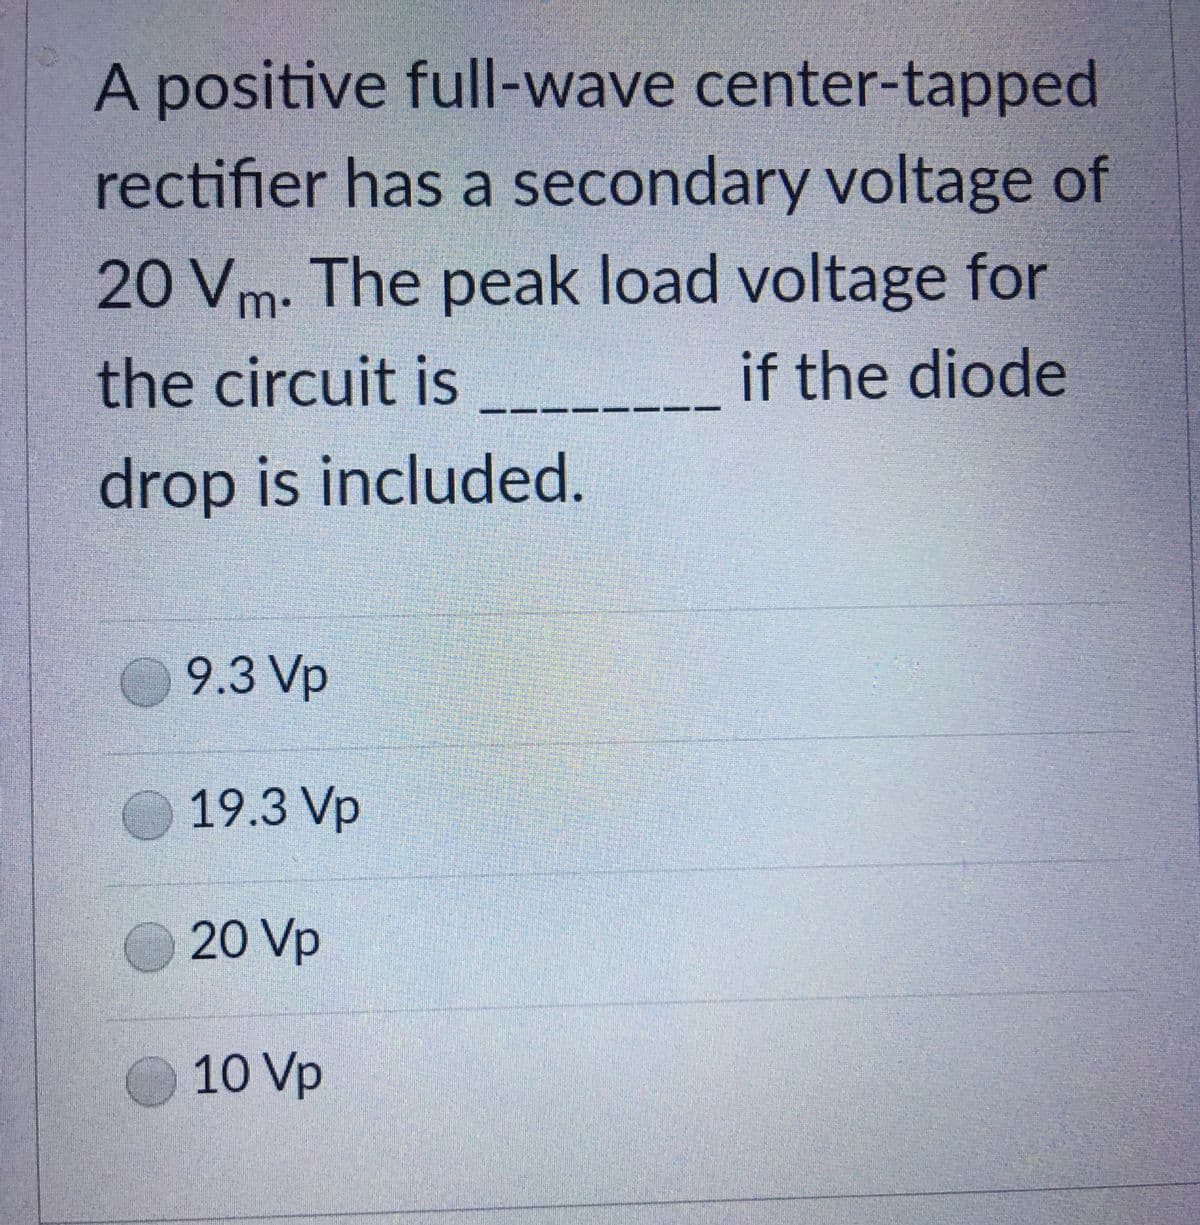 A positive full-wave center-tapped
rectifier has a secondary voltage of
20 Vm- The peak load voltage for
the circuit is
if the diode
drop is included.
9.3 Vp
19.3 Vp
20 Vp
10 Vp
